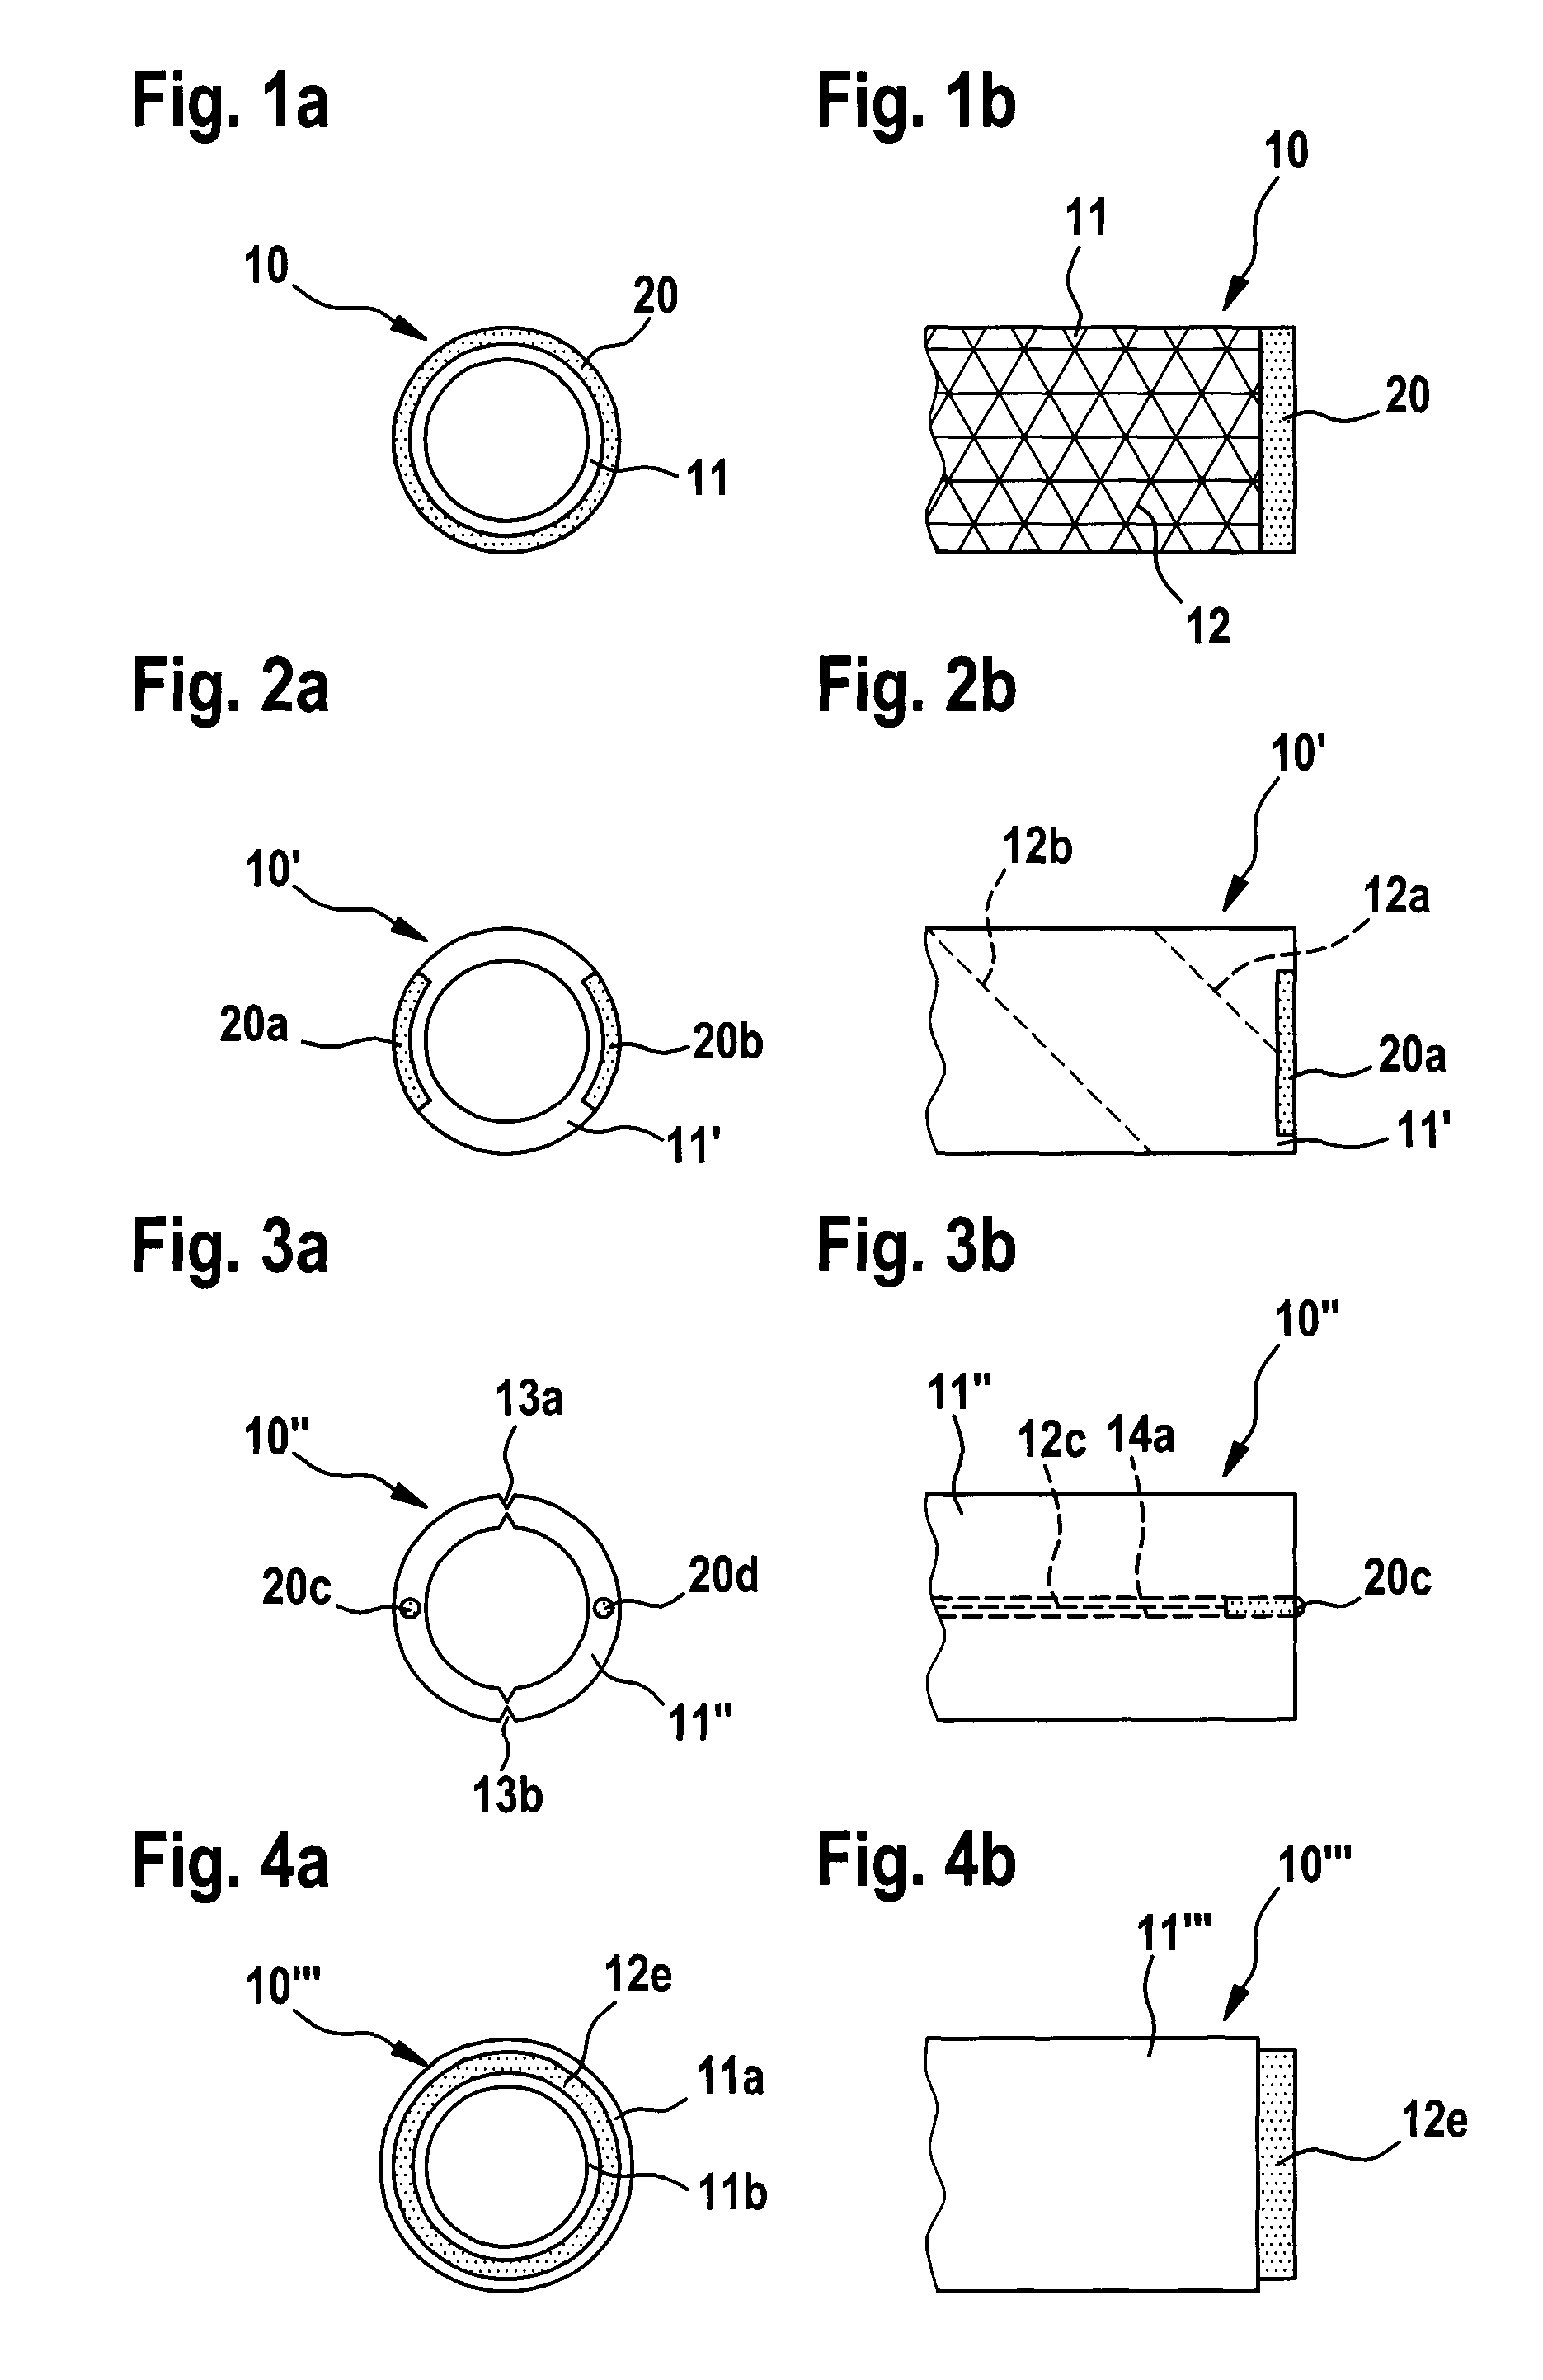 Device for insertion of electrode lines or other medical instruments into a body